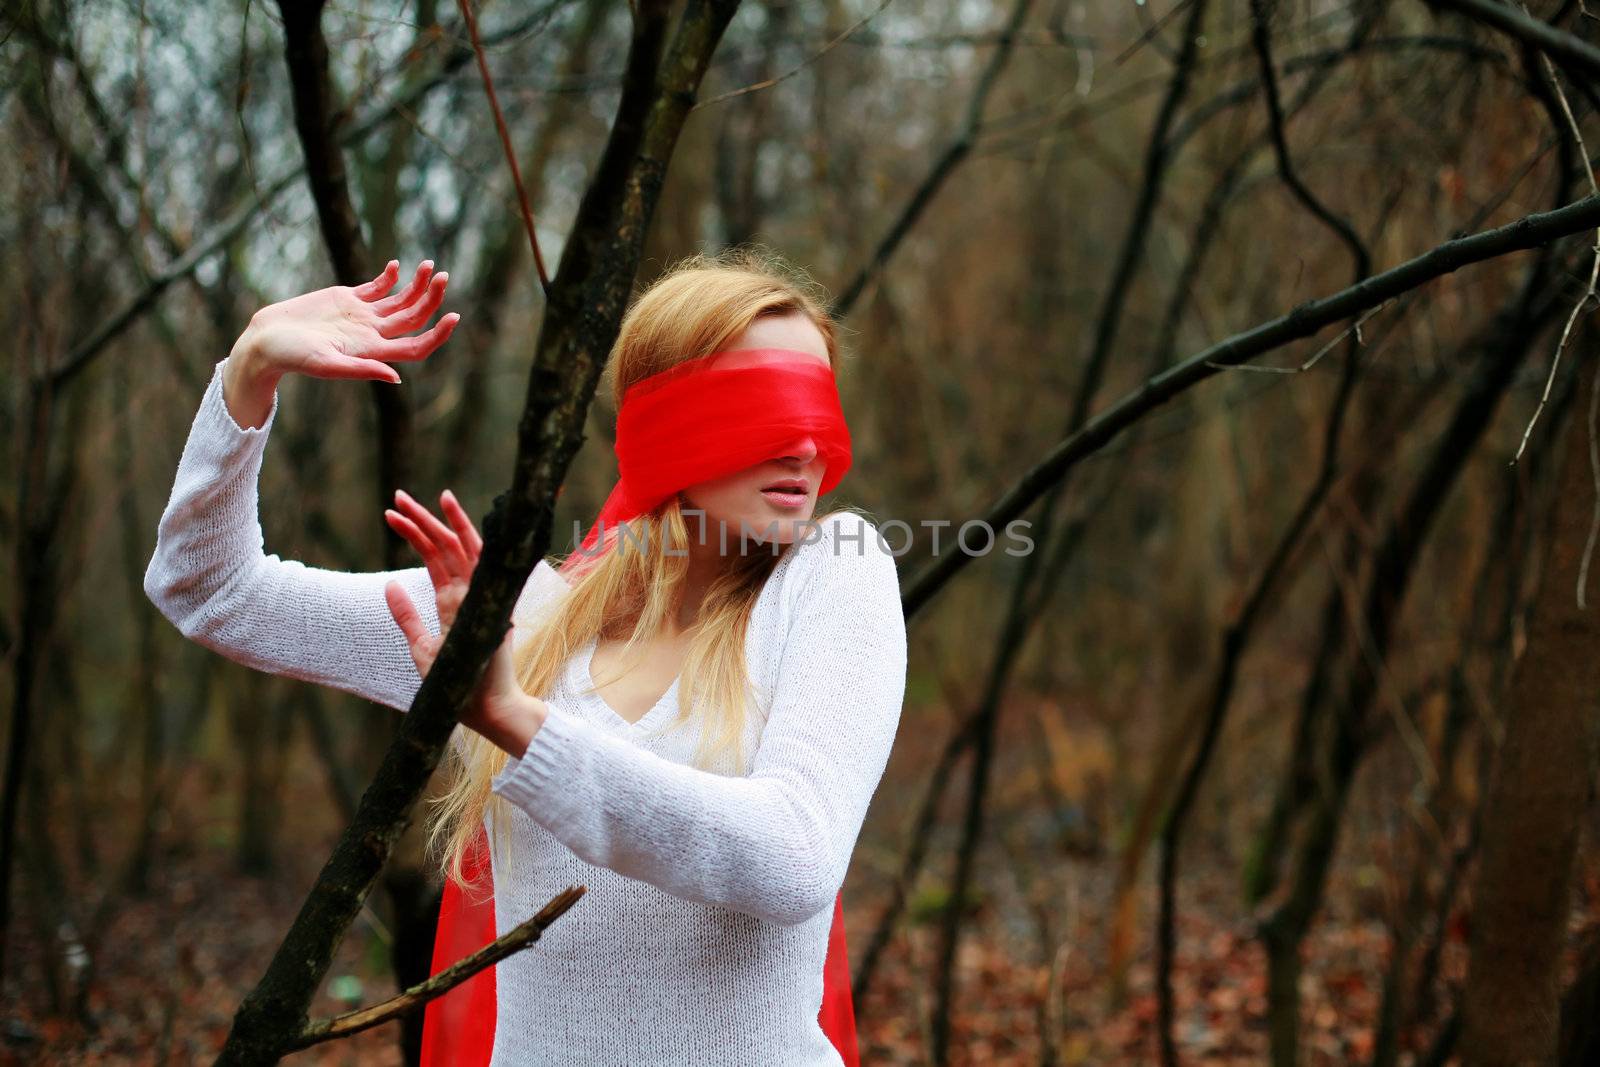 An image of blindfolded nice woman in the forest